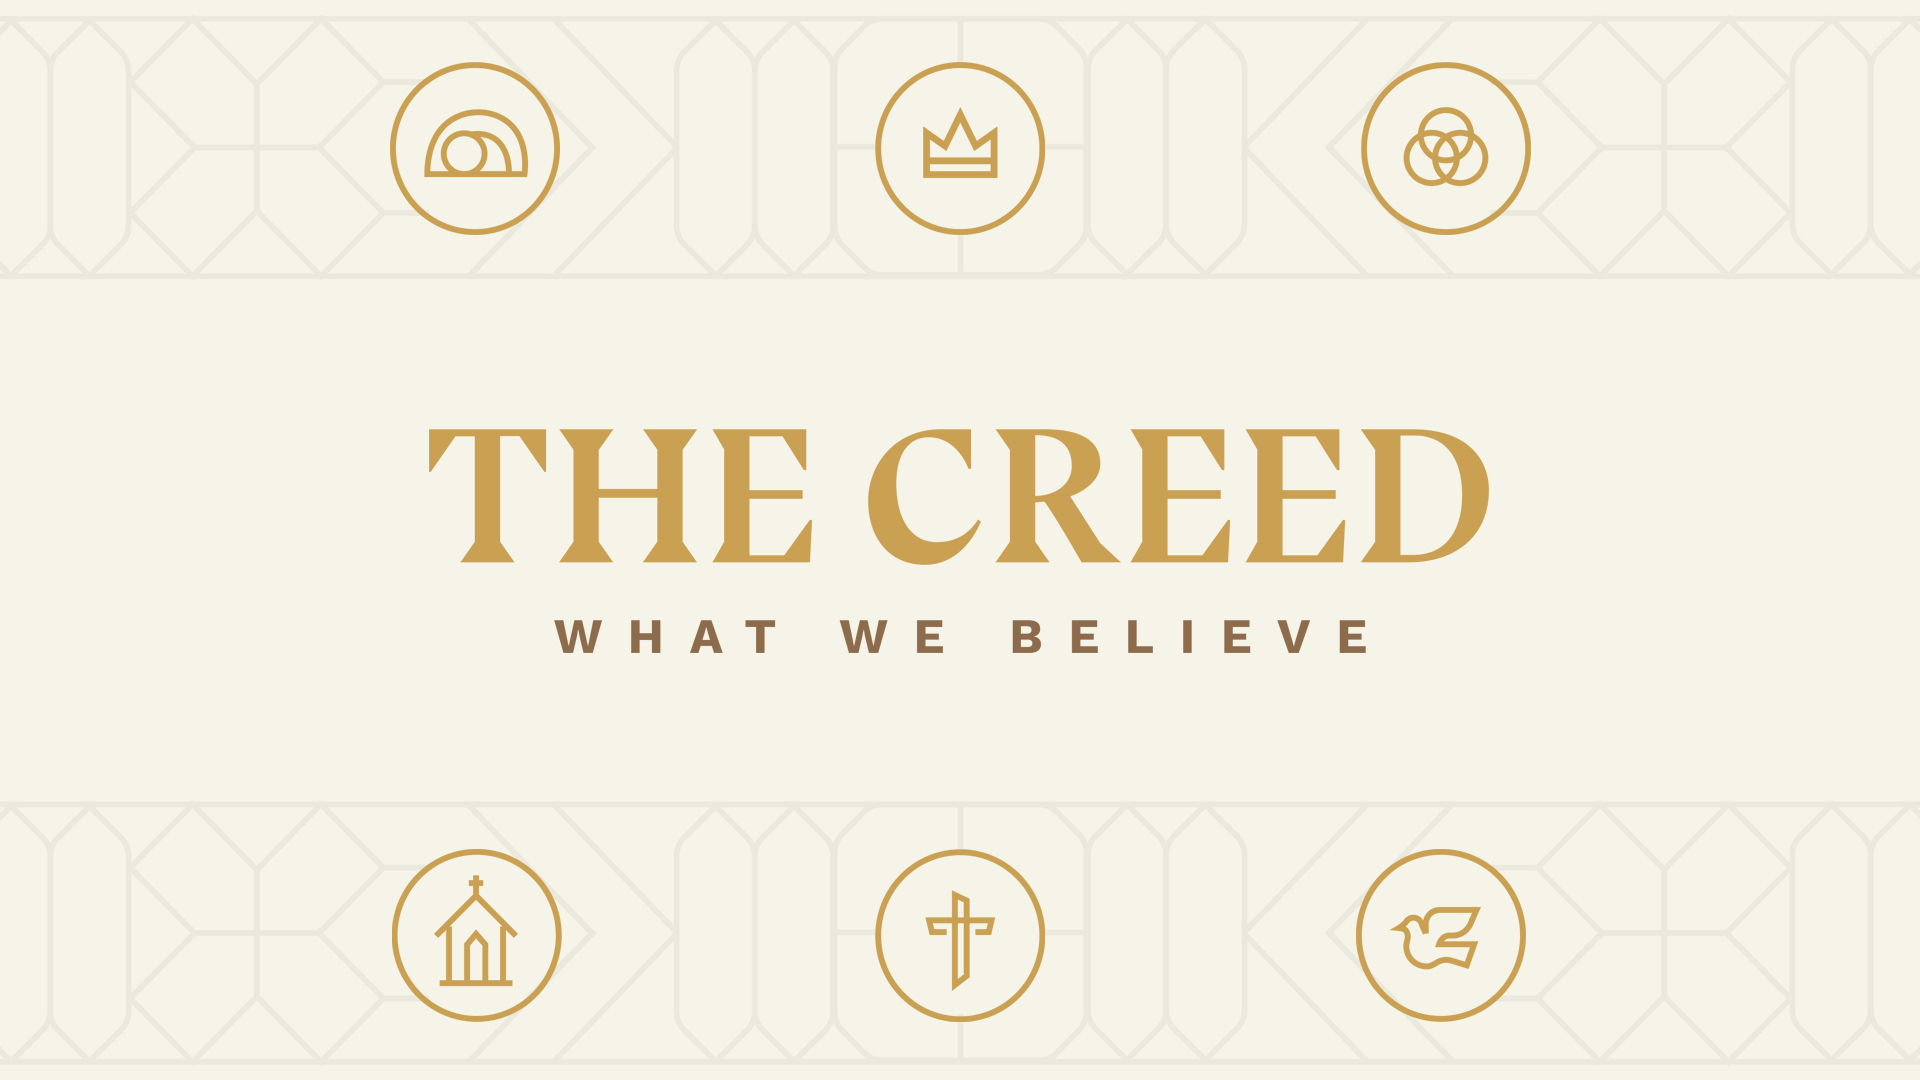 New Sermon Series – “The Creed: What We Believe”